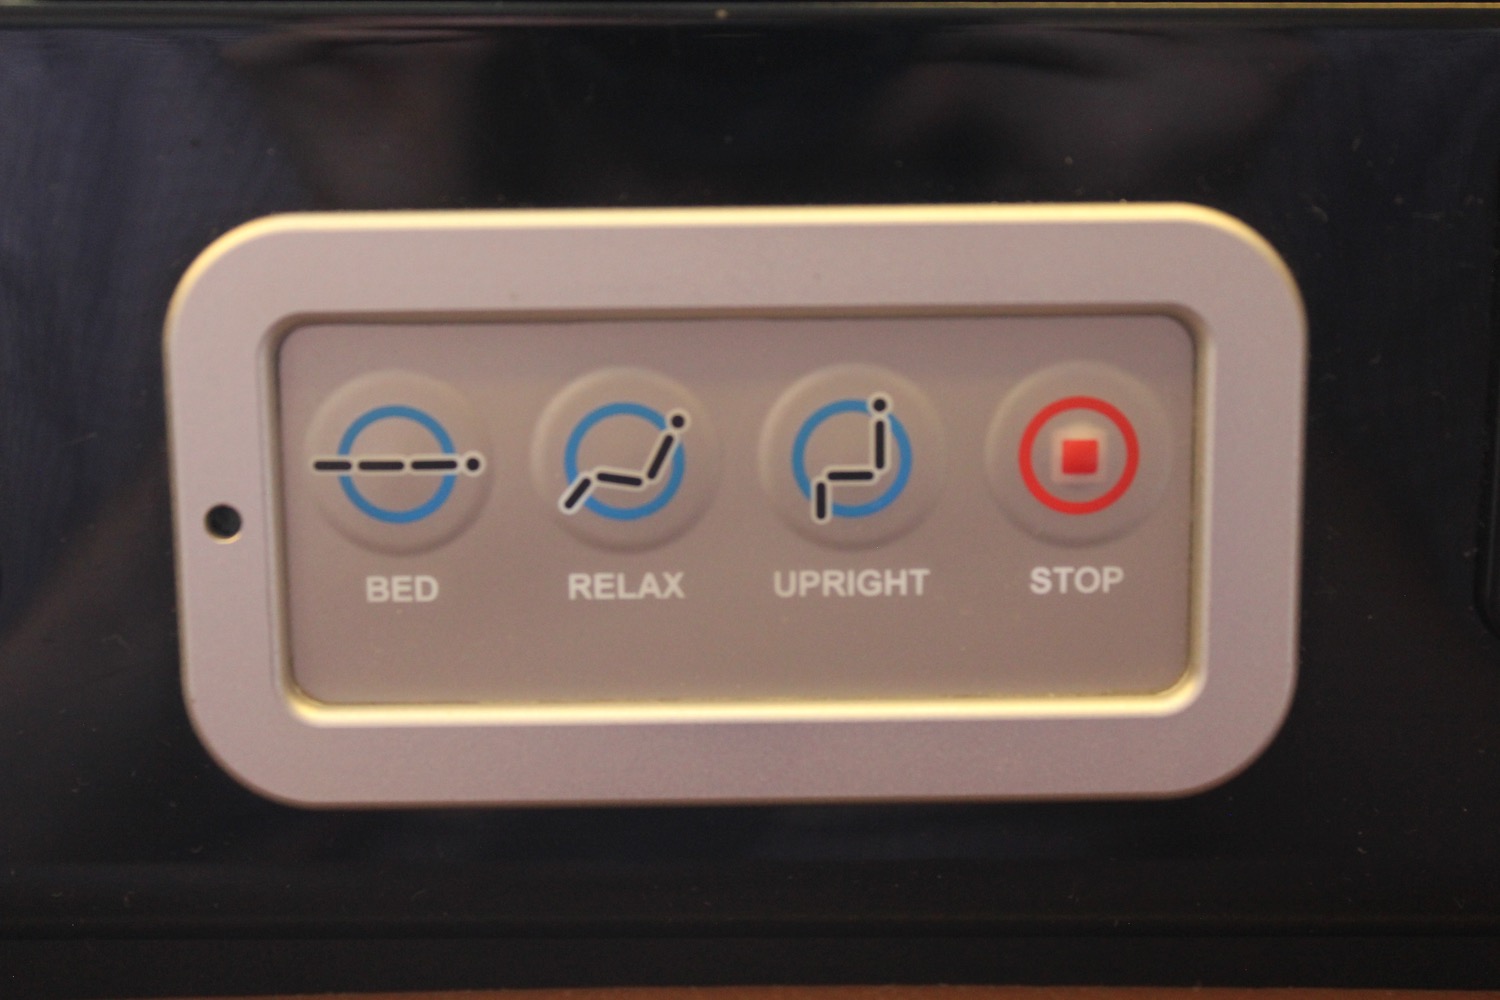 a white rectangular button with blue and red text